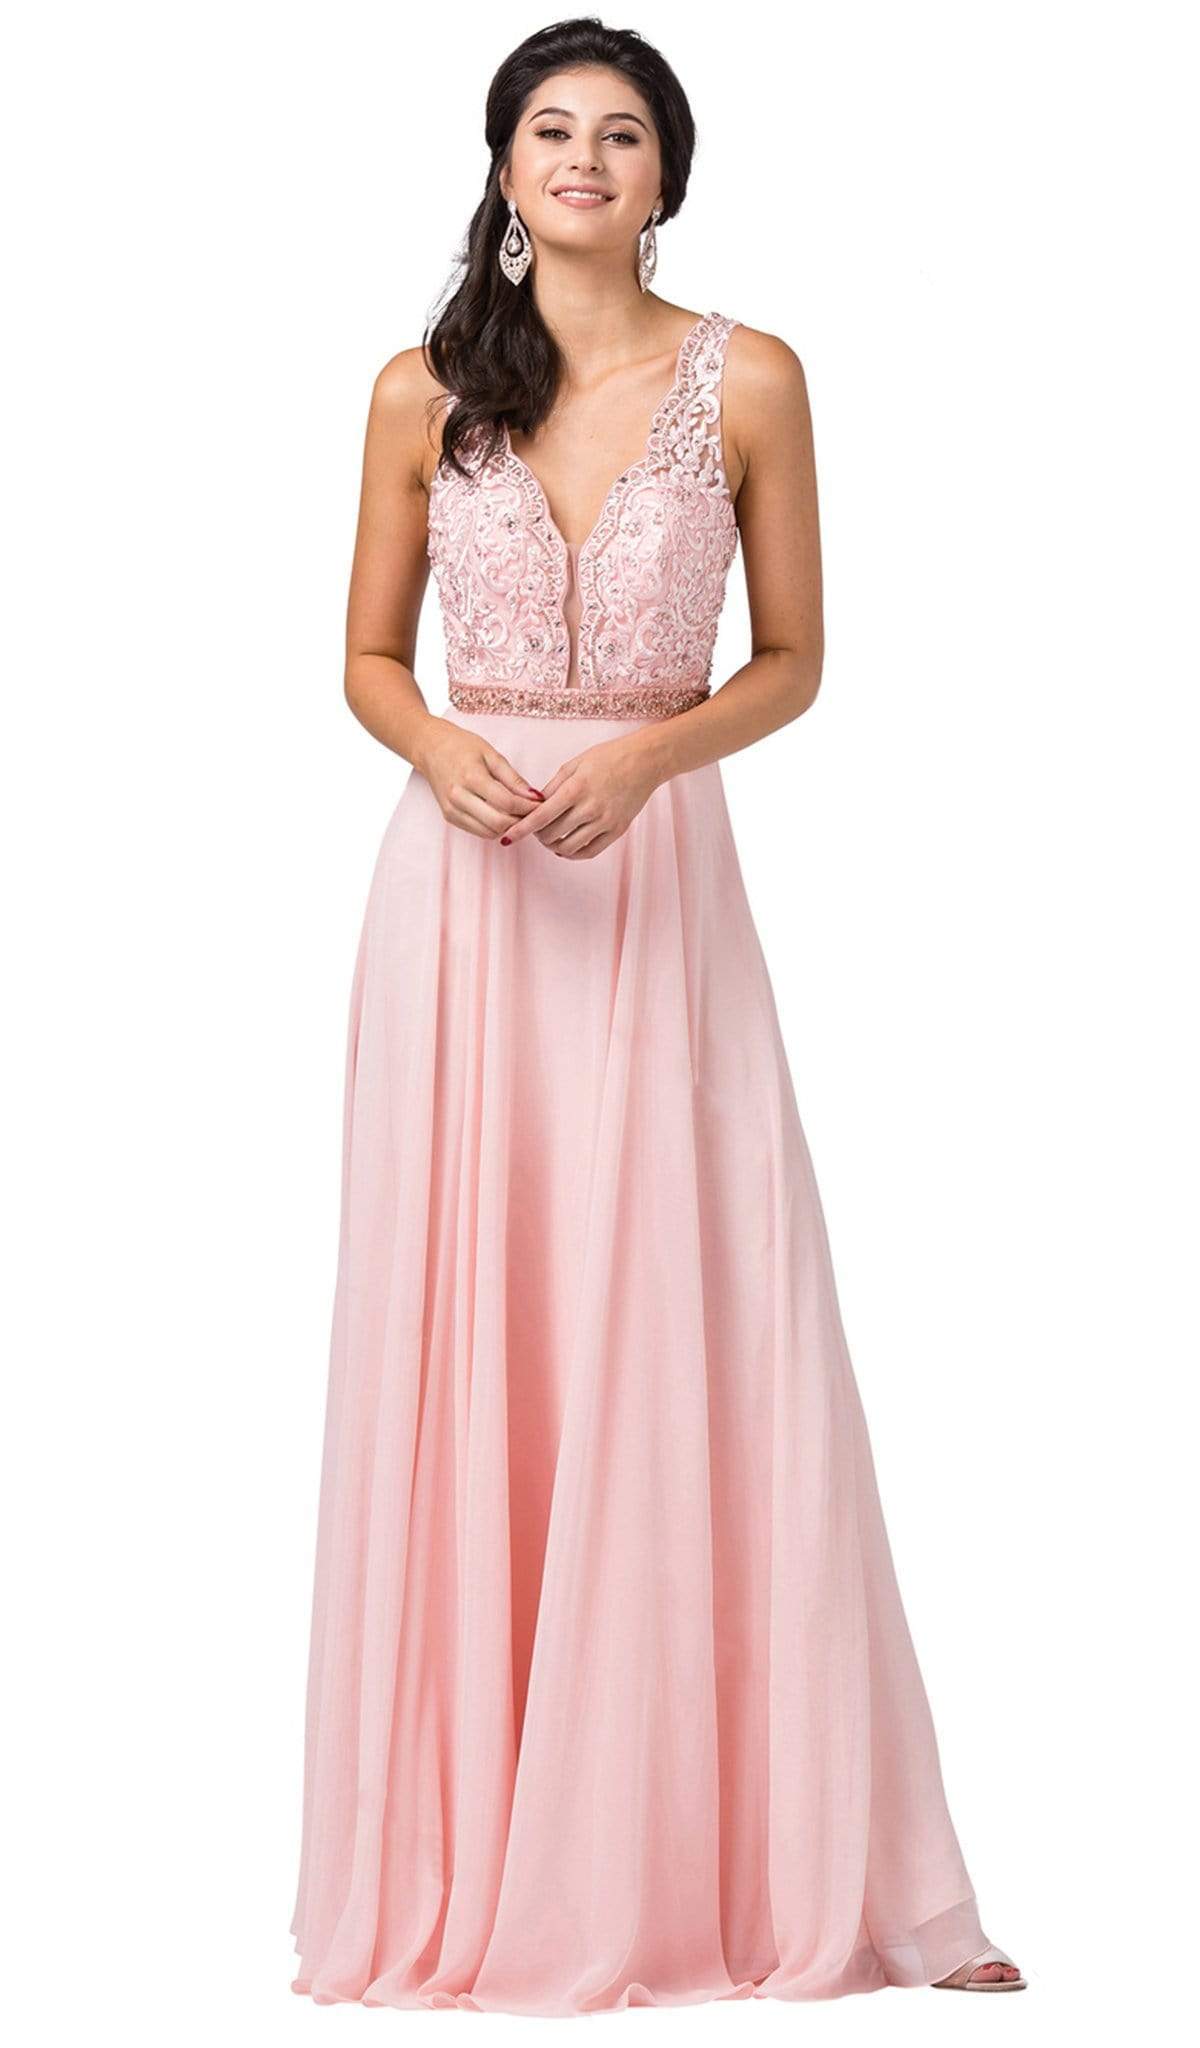 Dancing Queen - 2552 Scallop-Trimmed Plunging V-Neck A-Line Gown